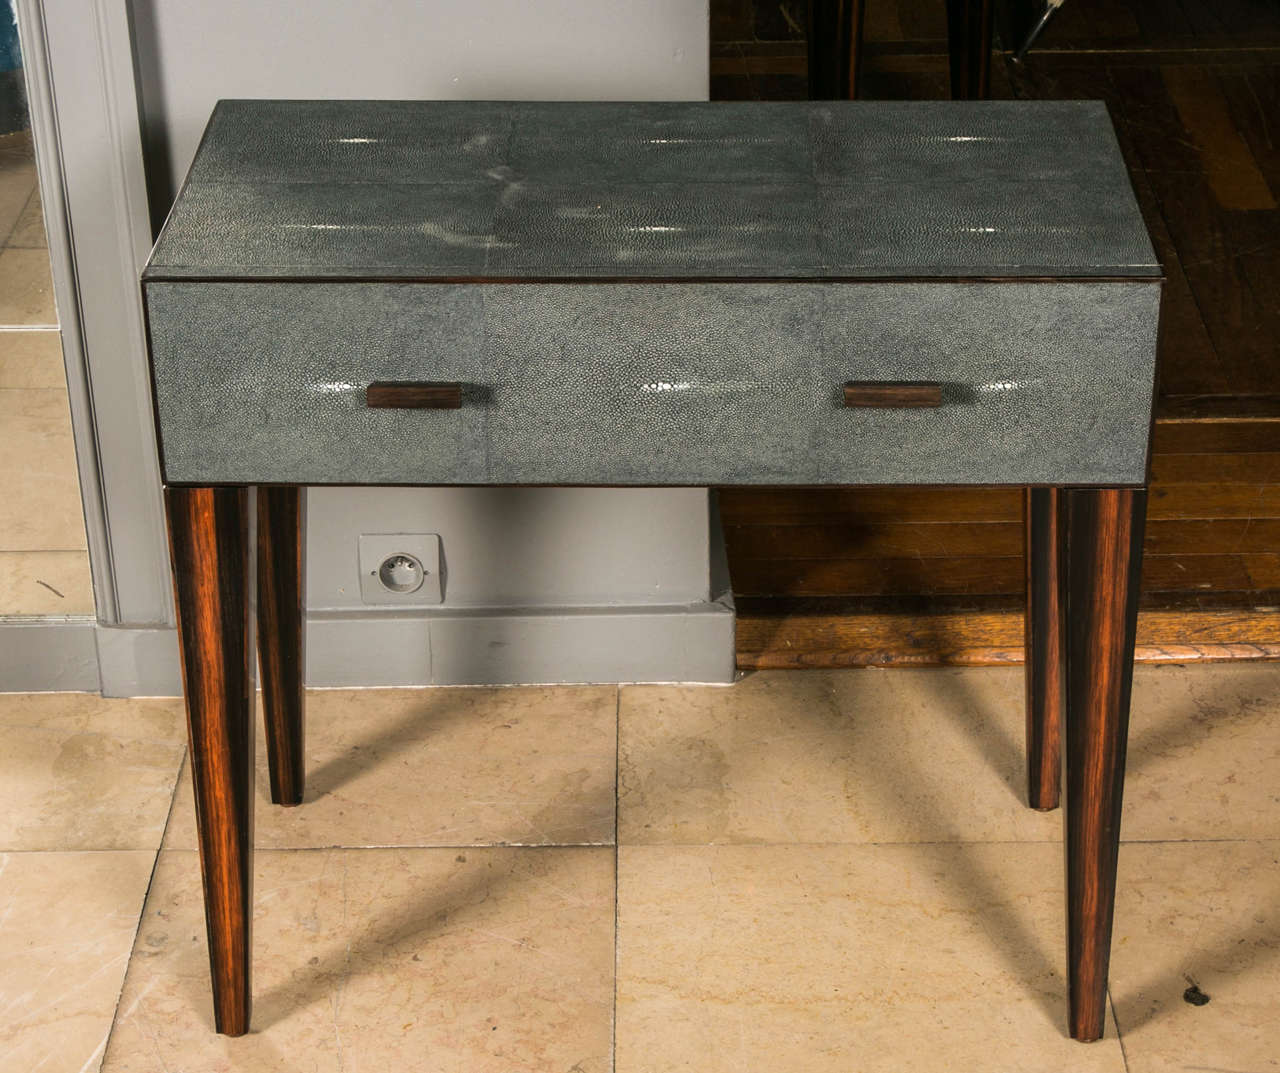 Lovely pair of shagreen bedside tables with one drawer, legs in Macassar ebony.